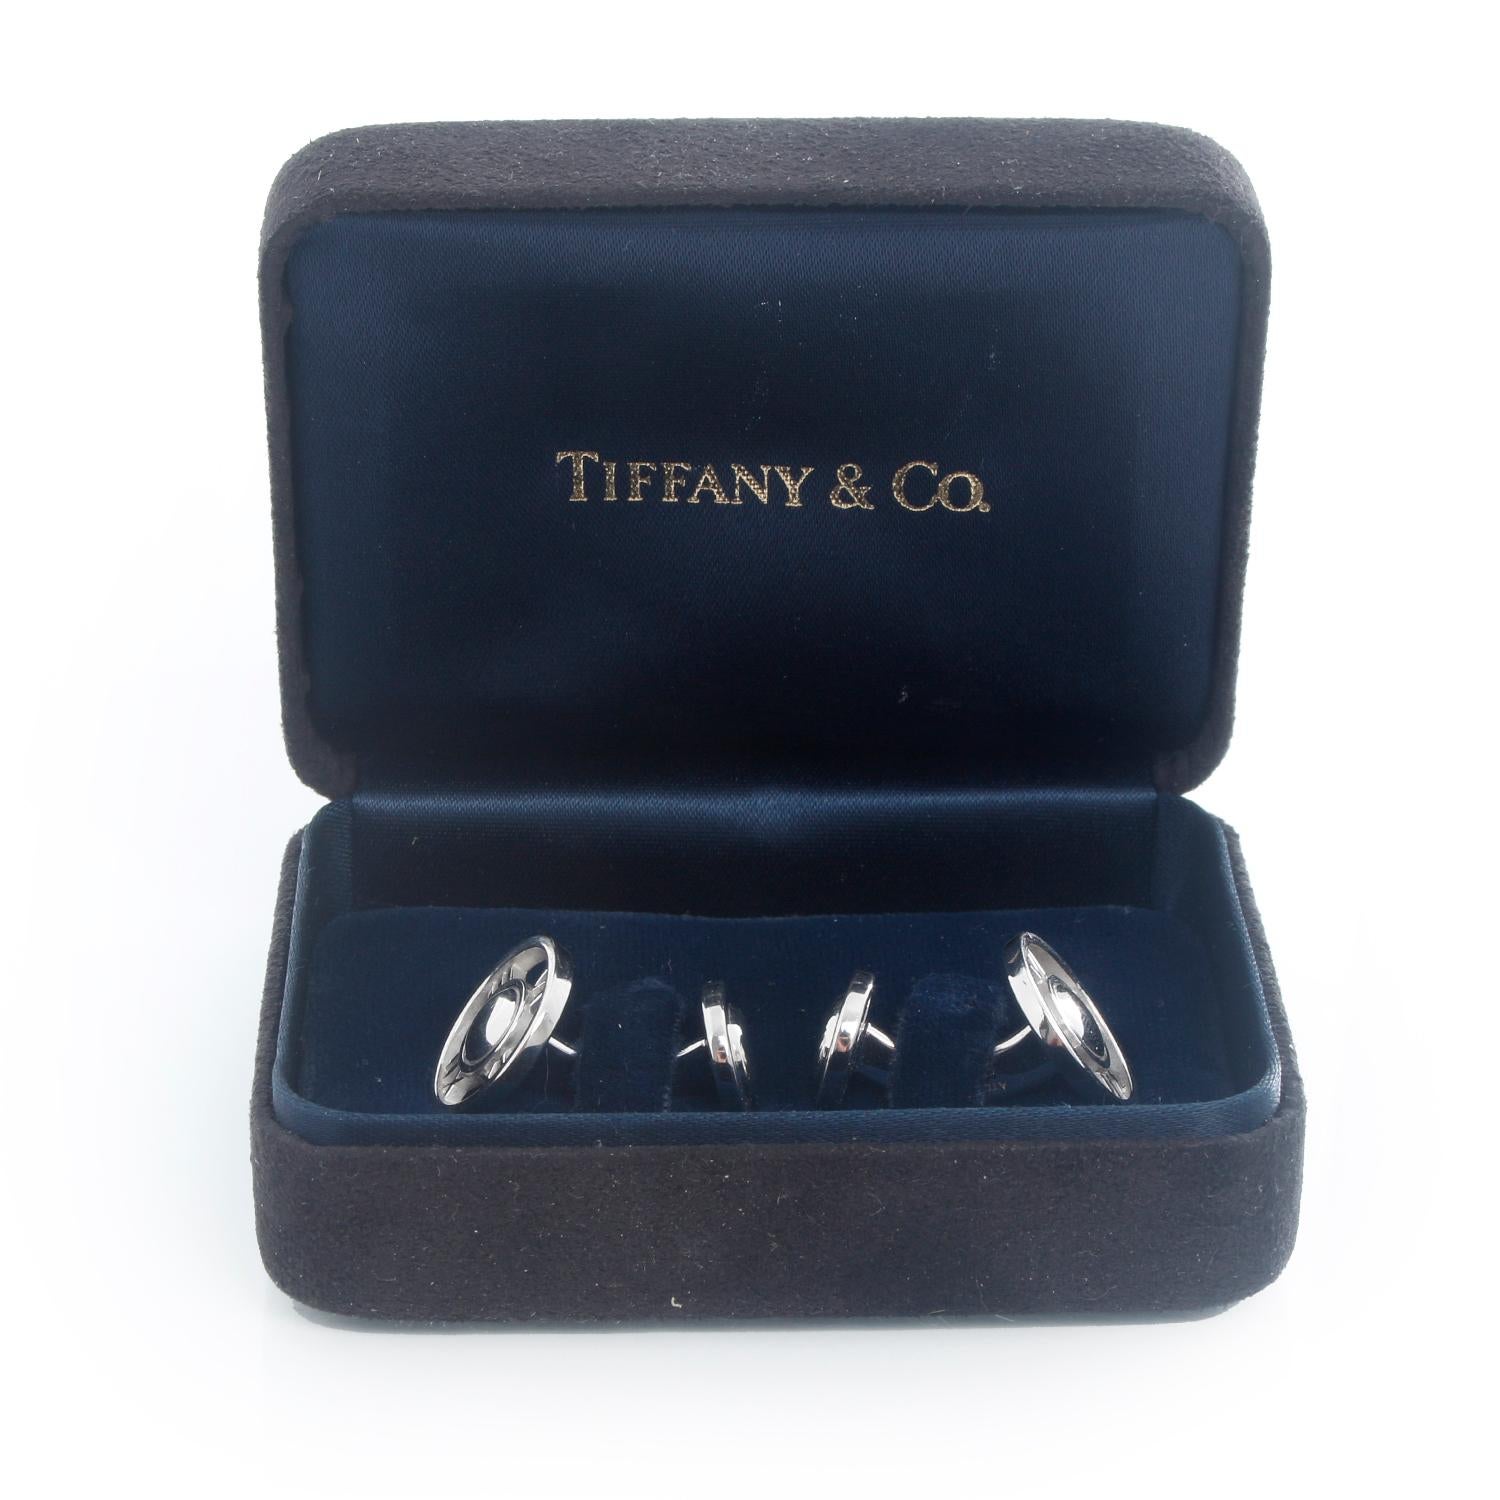 Tiffany & Co. 18K White Gold Atlas Cufflinks  - Tiffany & Co. 18K White Gold Round Atlas Roman Numeral Cuff links Hallmarked; makers mark, 750, ITALY 
Measurement :25 mm x 15 mm
Total weight: 14.97 grams 
Pre-owned with Tiffany & box .